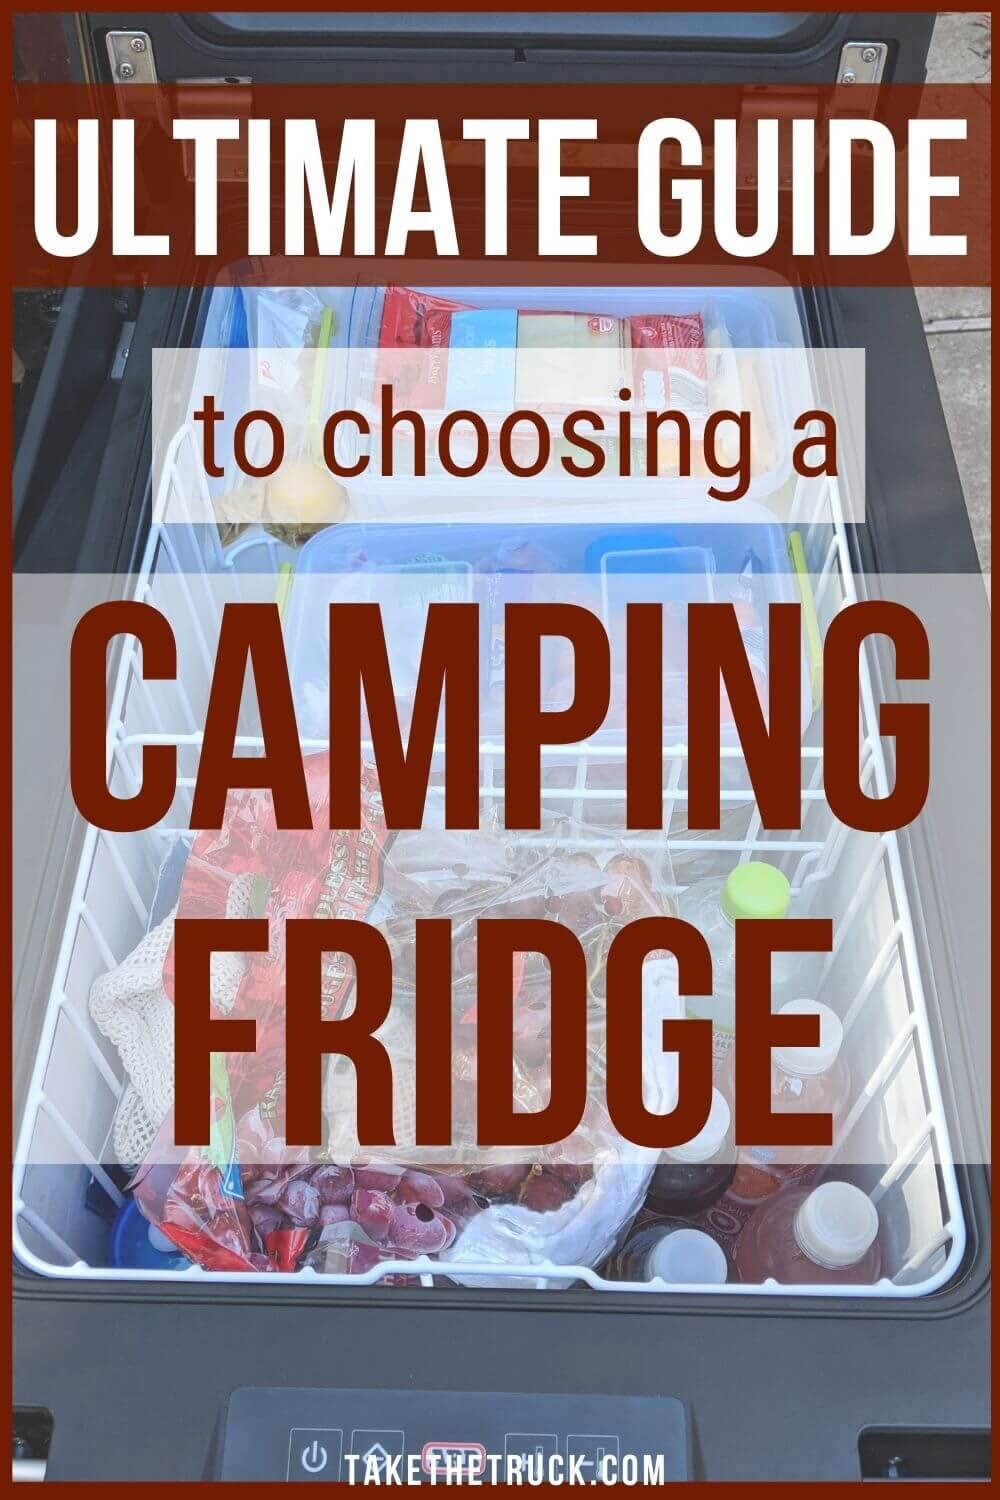 All you need to know before choosing the best camping fridge for your wants and needs! A portable fridge when camping is a huge upgrade from a cooler. Step by step tips on finding a camping fridge.